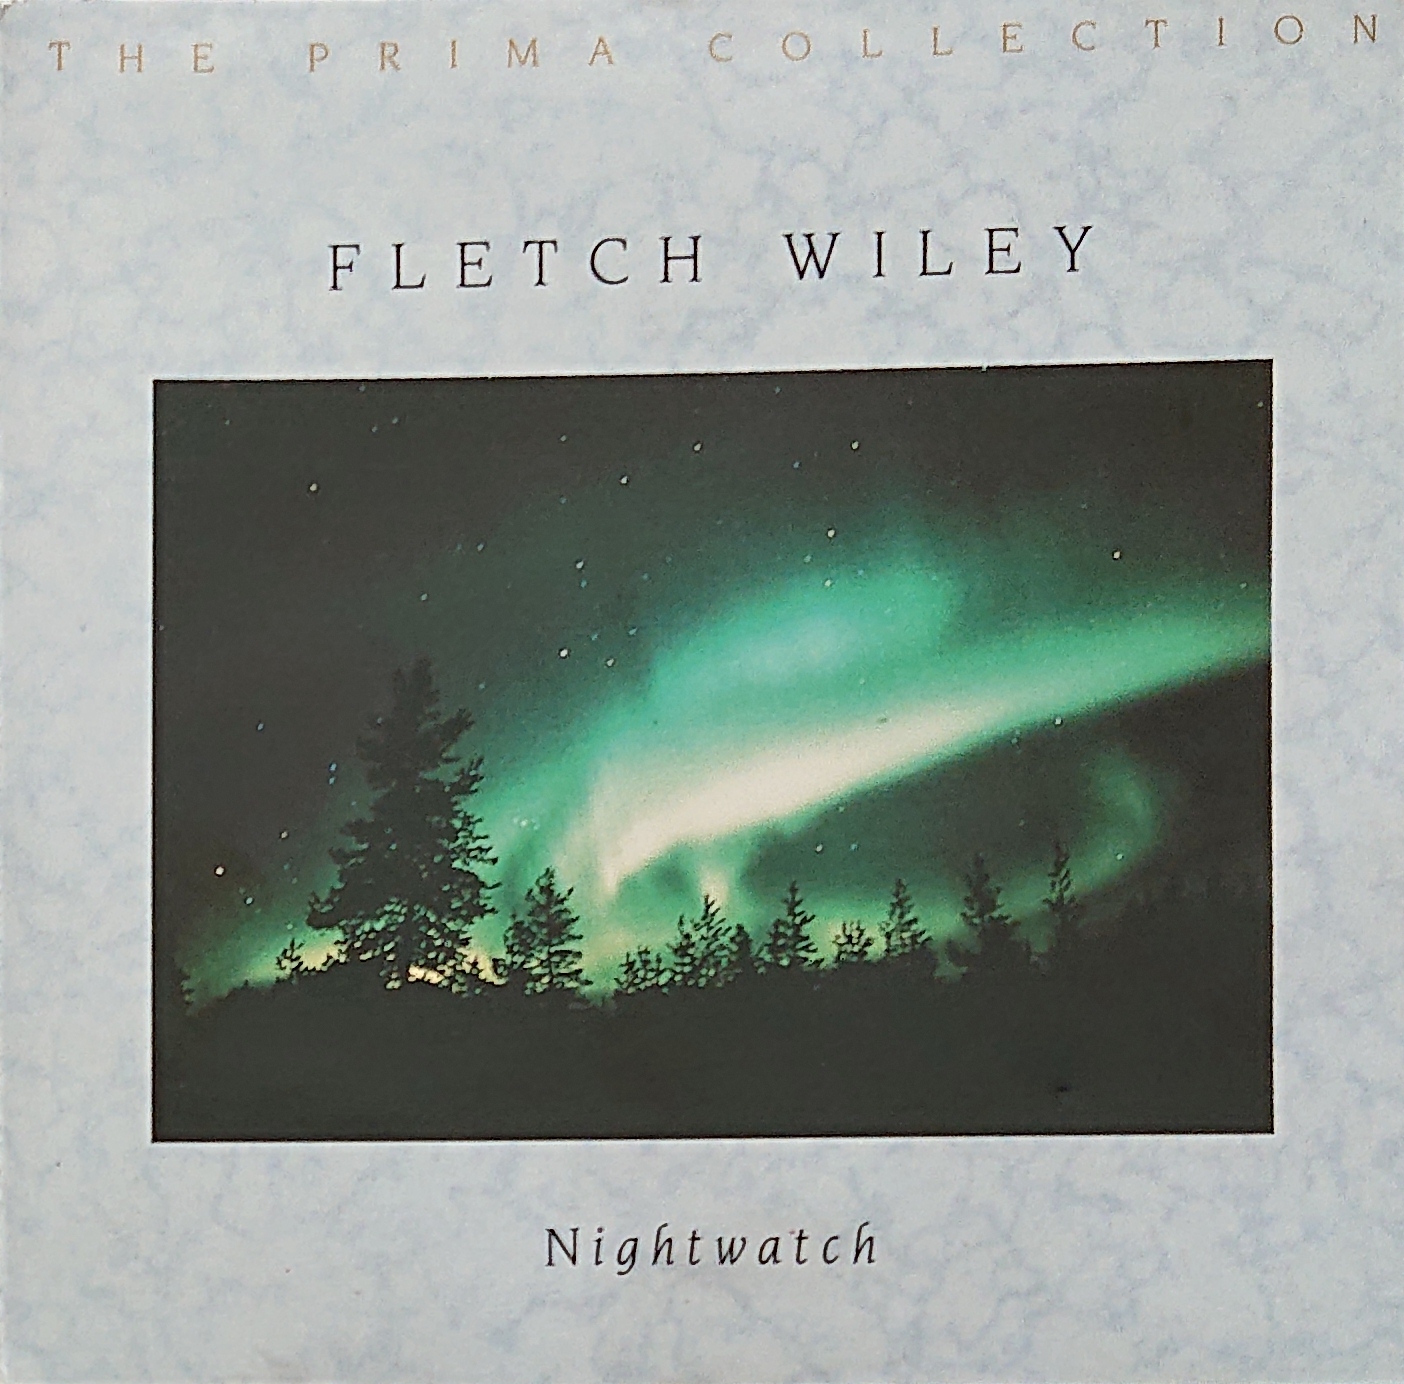 Picture of CDPM 6000 Night watch by artist Fletch Wiley from the BBC cds - Records and Tapes library